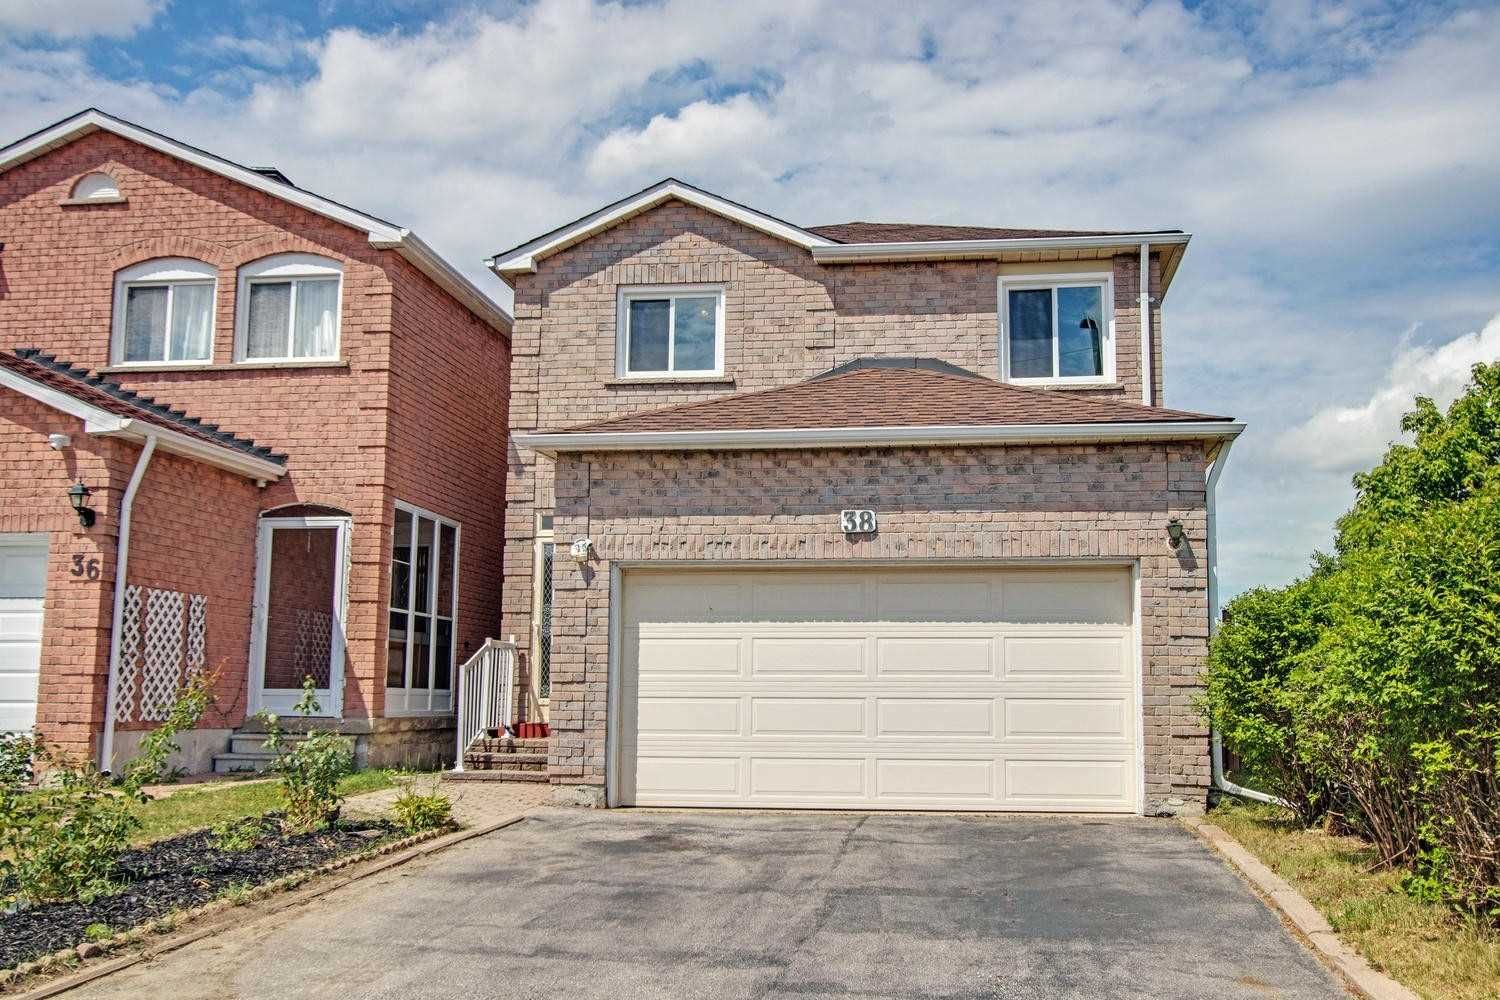 Main Photo: 38 Dellano Street in Markham: Middlefield House (2-Storey) for sale : MLS®# N4841250